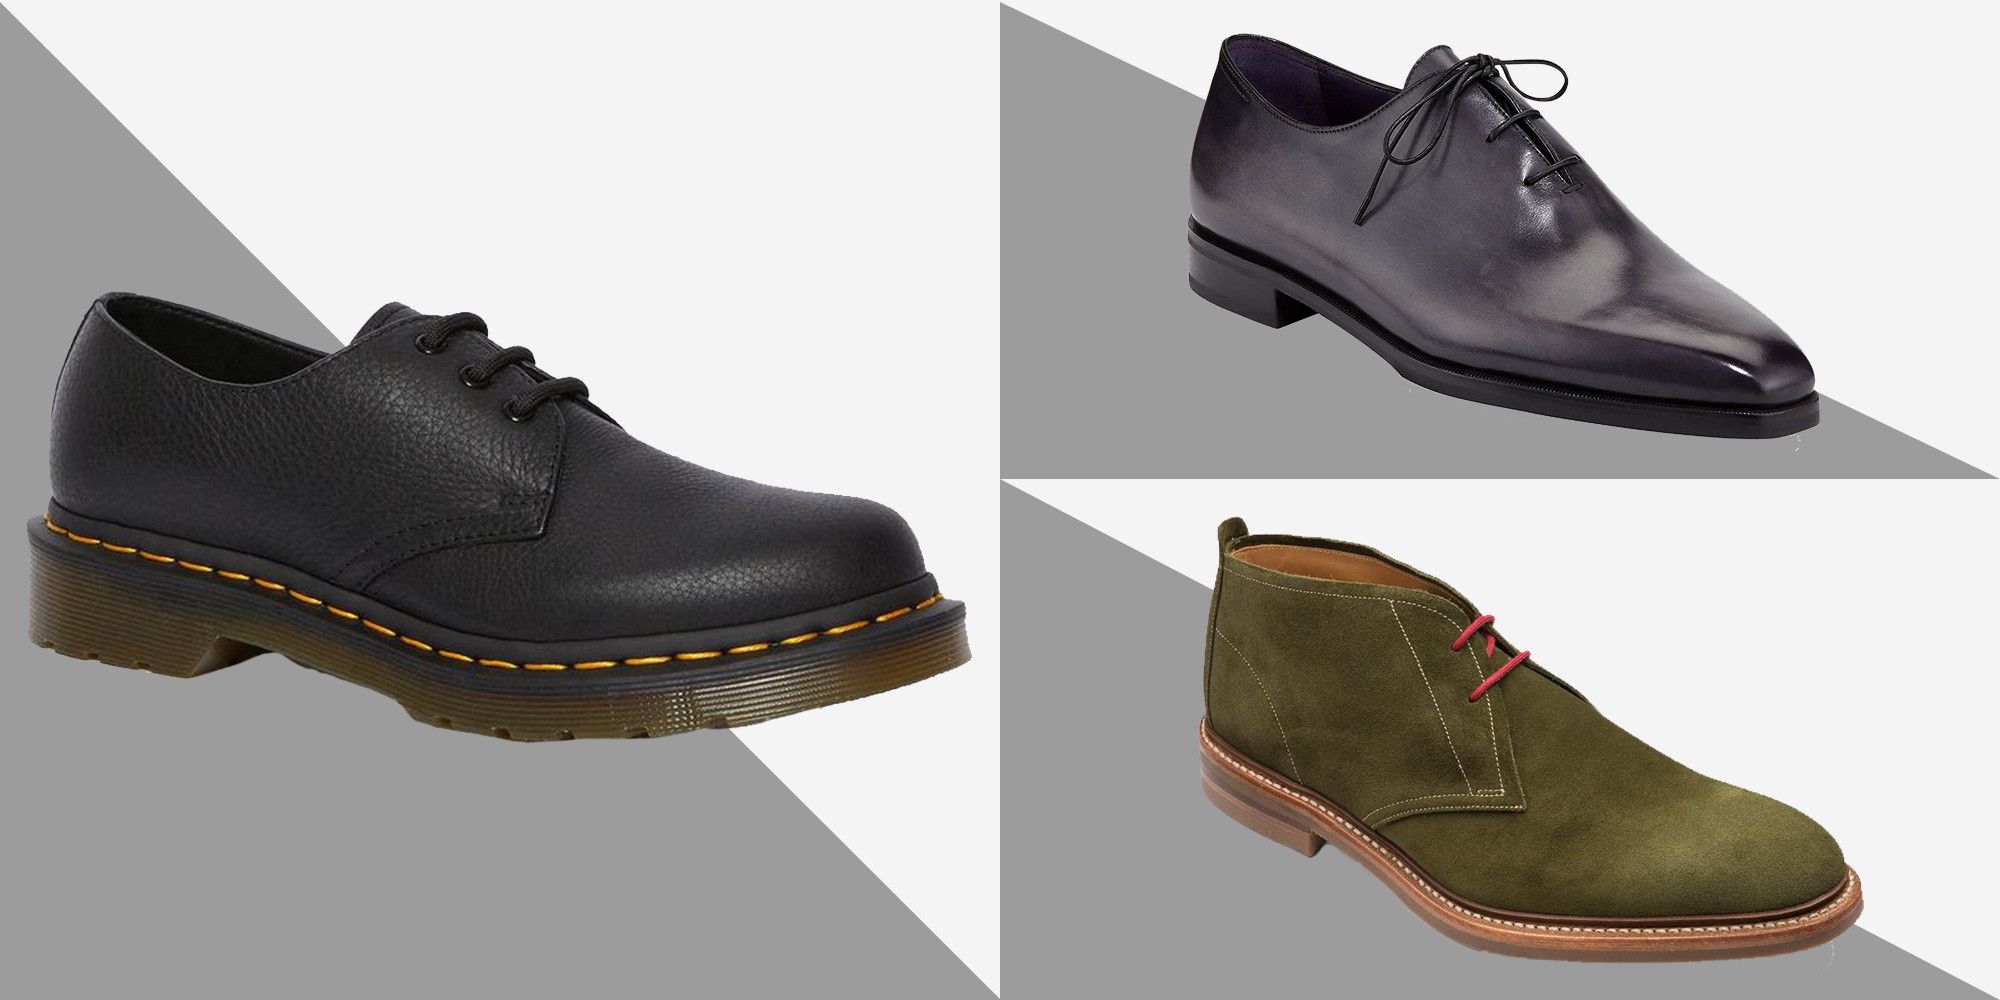 10 Shoe Brands That Every Guy Needs to Know